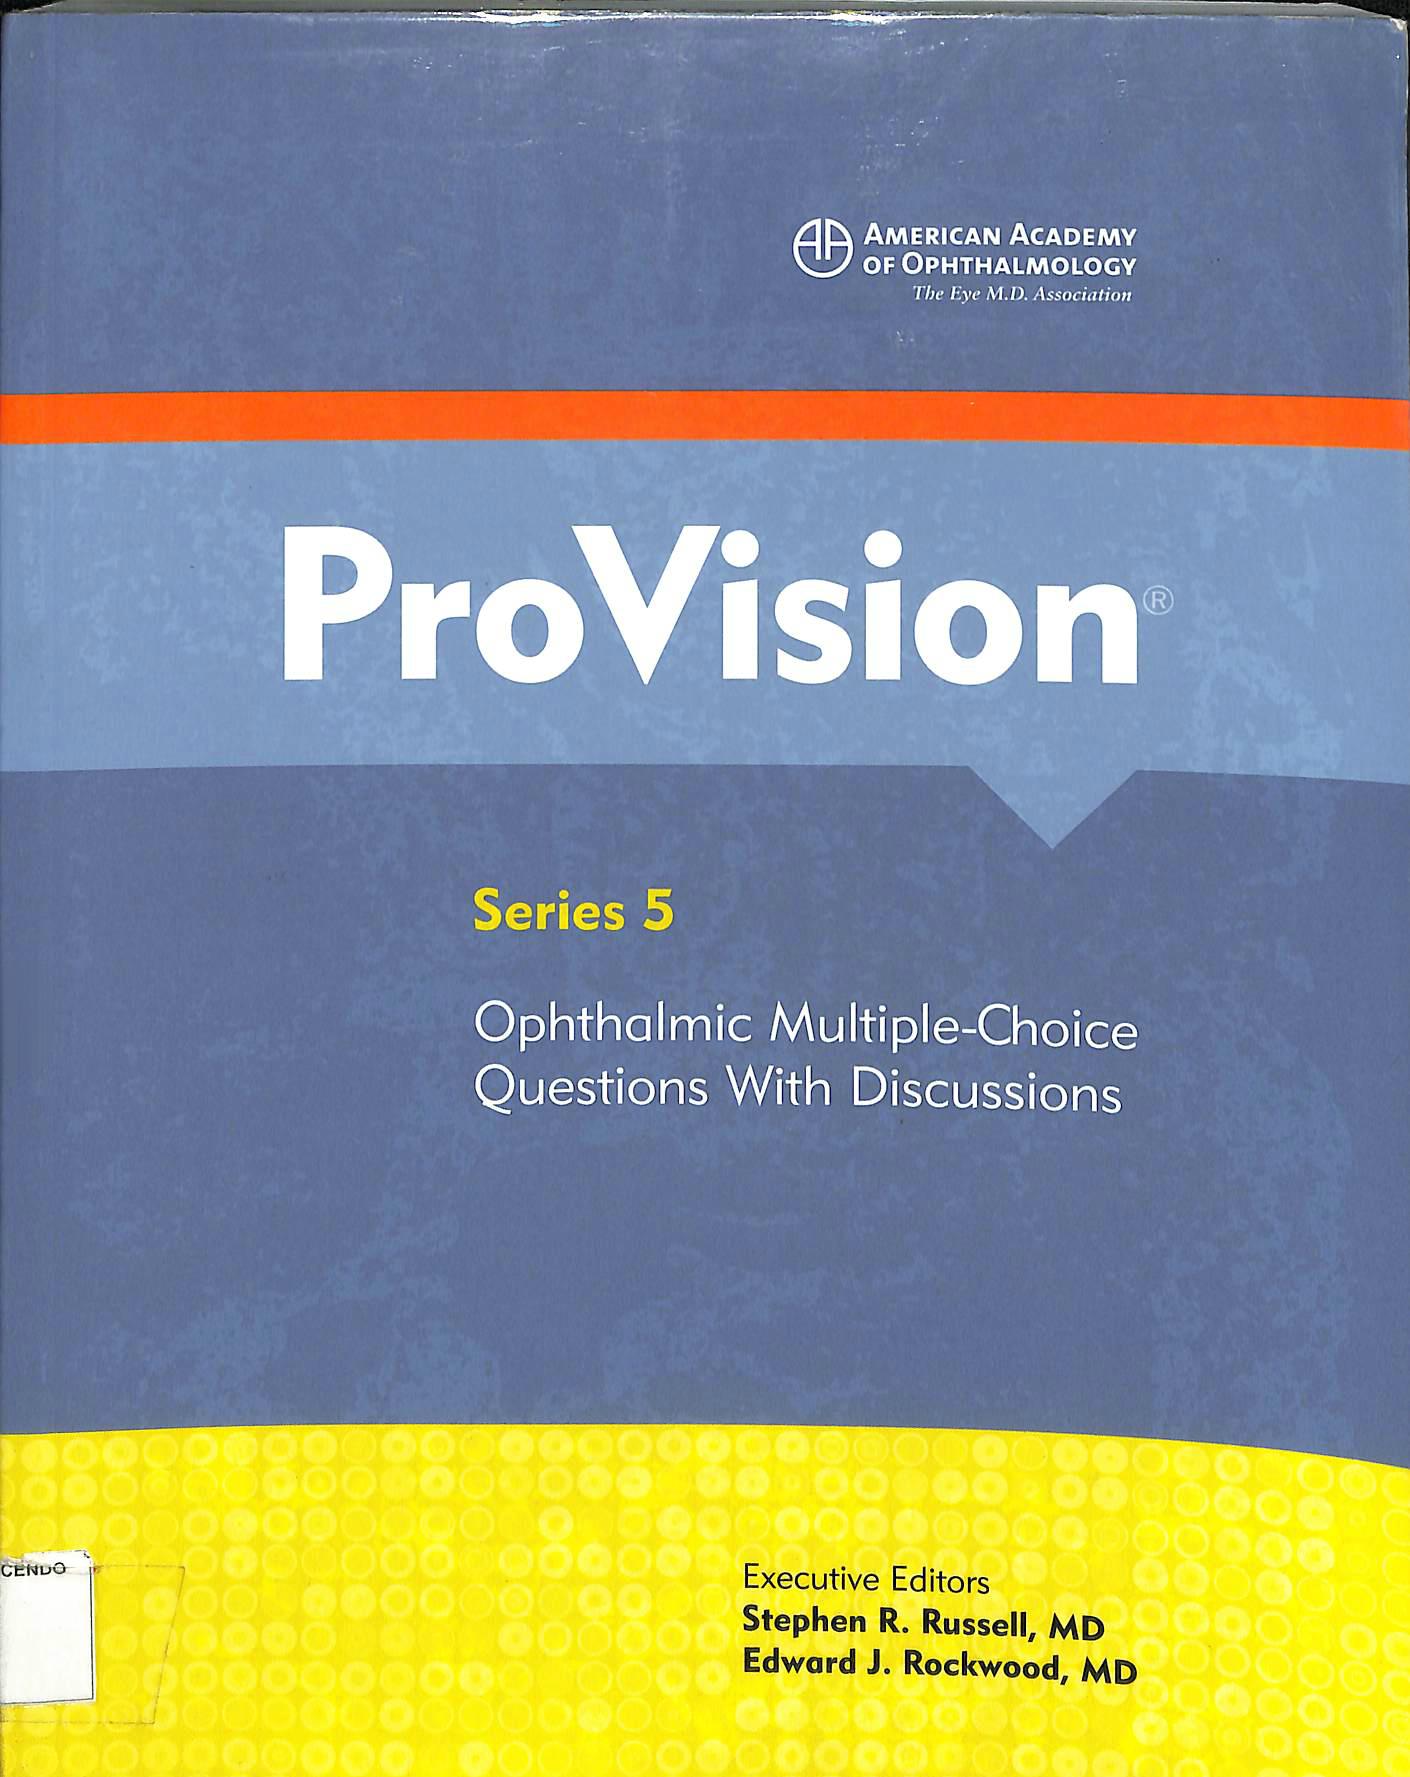 provision series 5 ophthalmic multiple choice questions with discussions